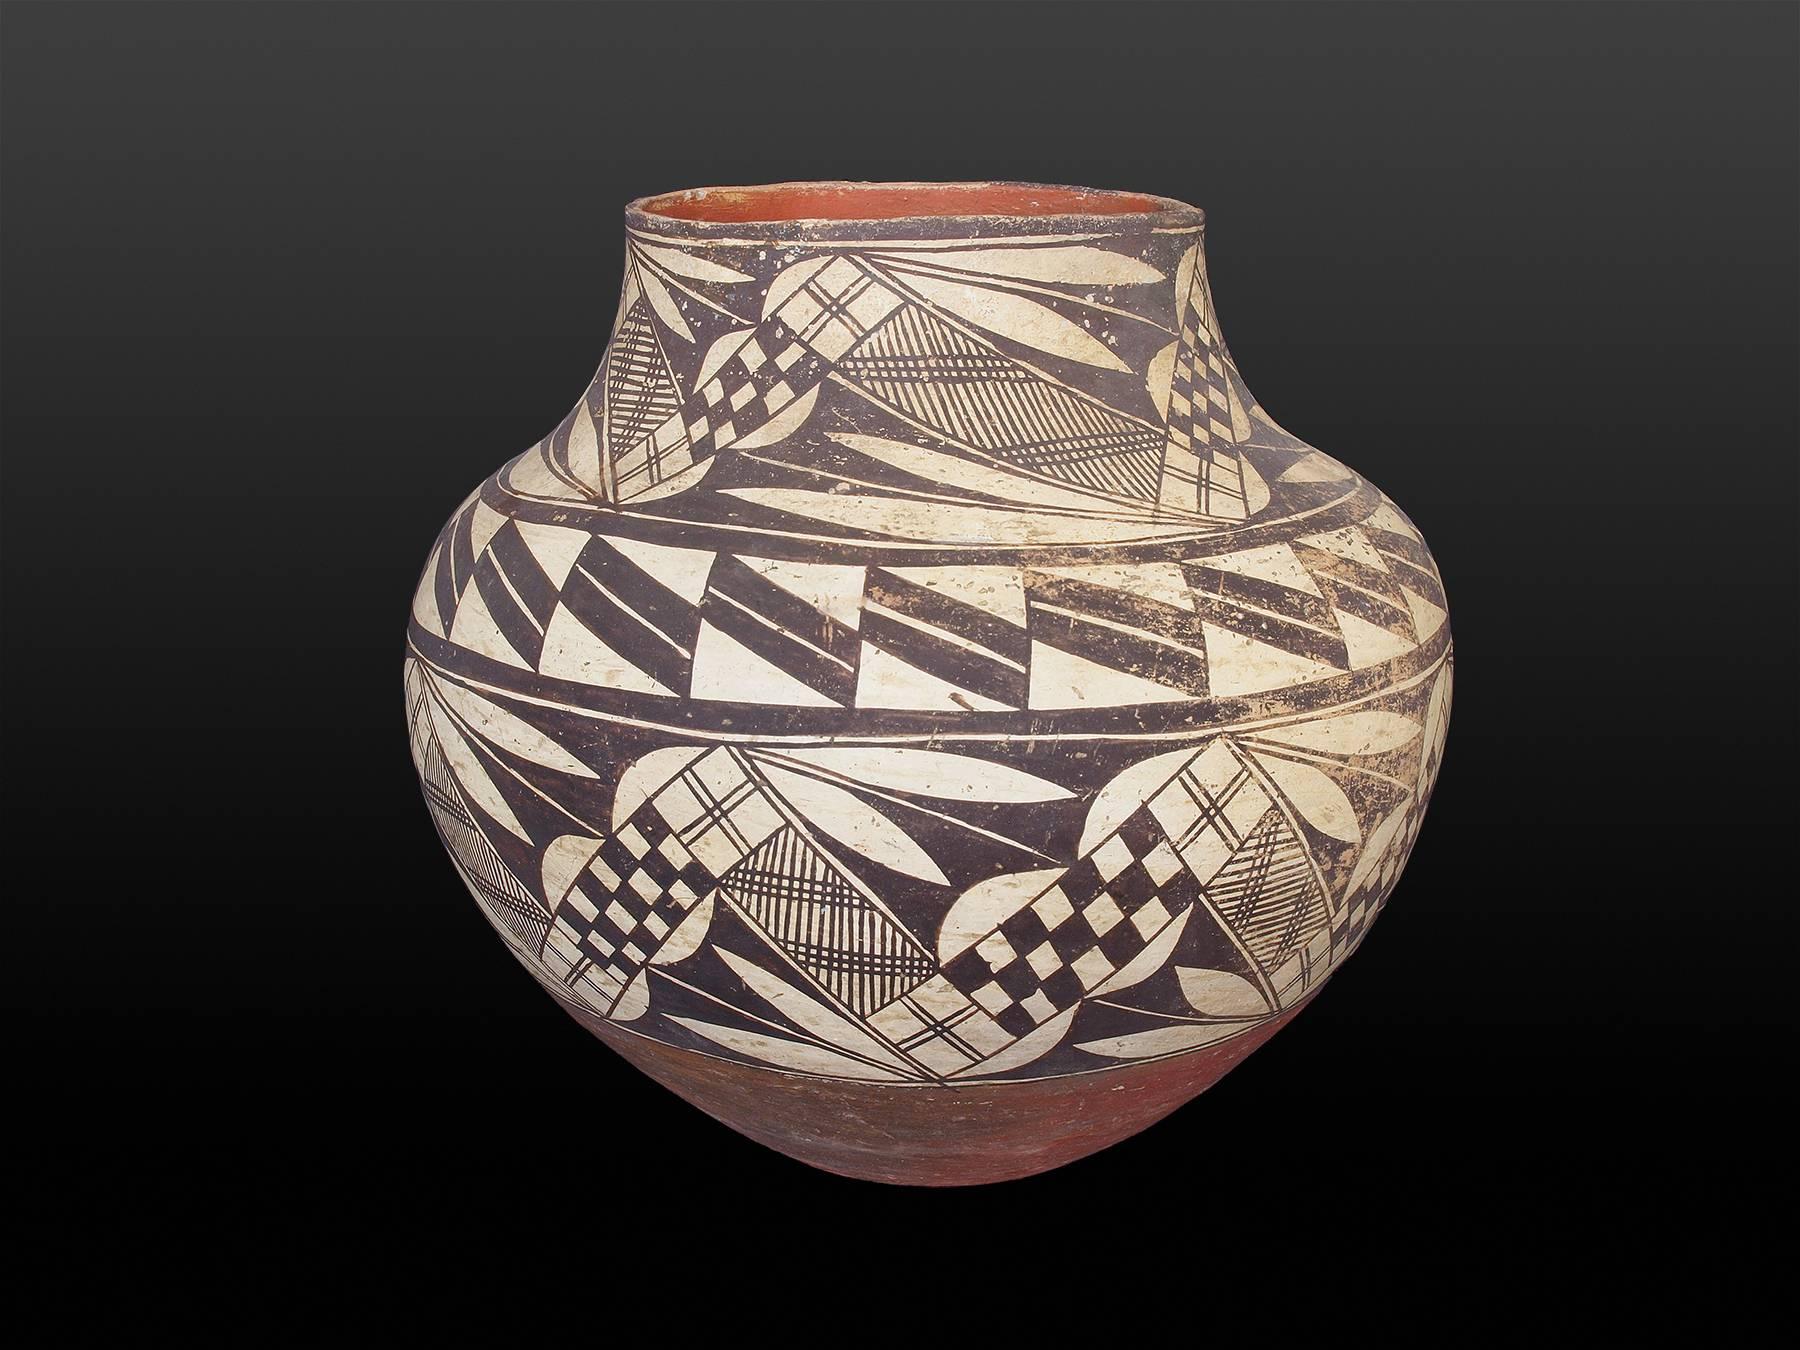 A graceful jar form built by hand from native clay by an American Indian potter at Acoma Pueblo and very finely painted with slip glazes.

Acoma Pueblo is located in New Mexico approximately 60 miles west of Albuquerque. Jars or Ollas such as this